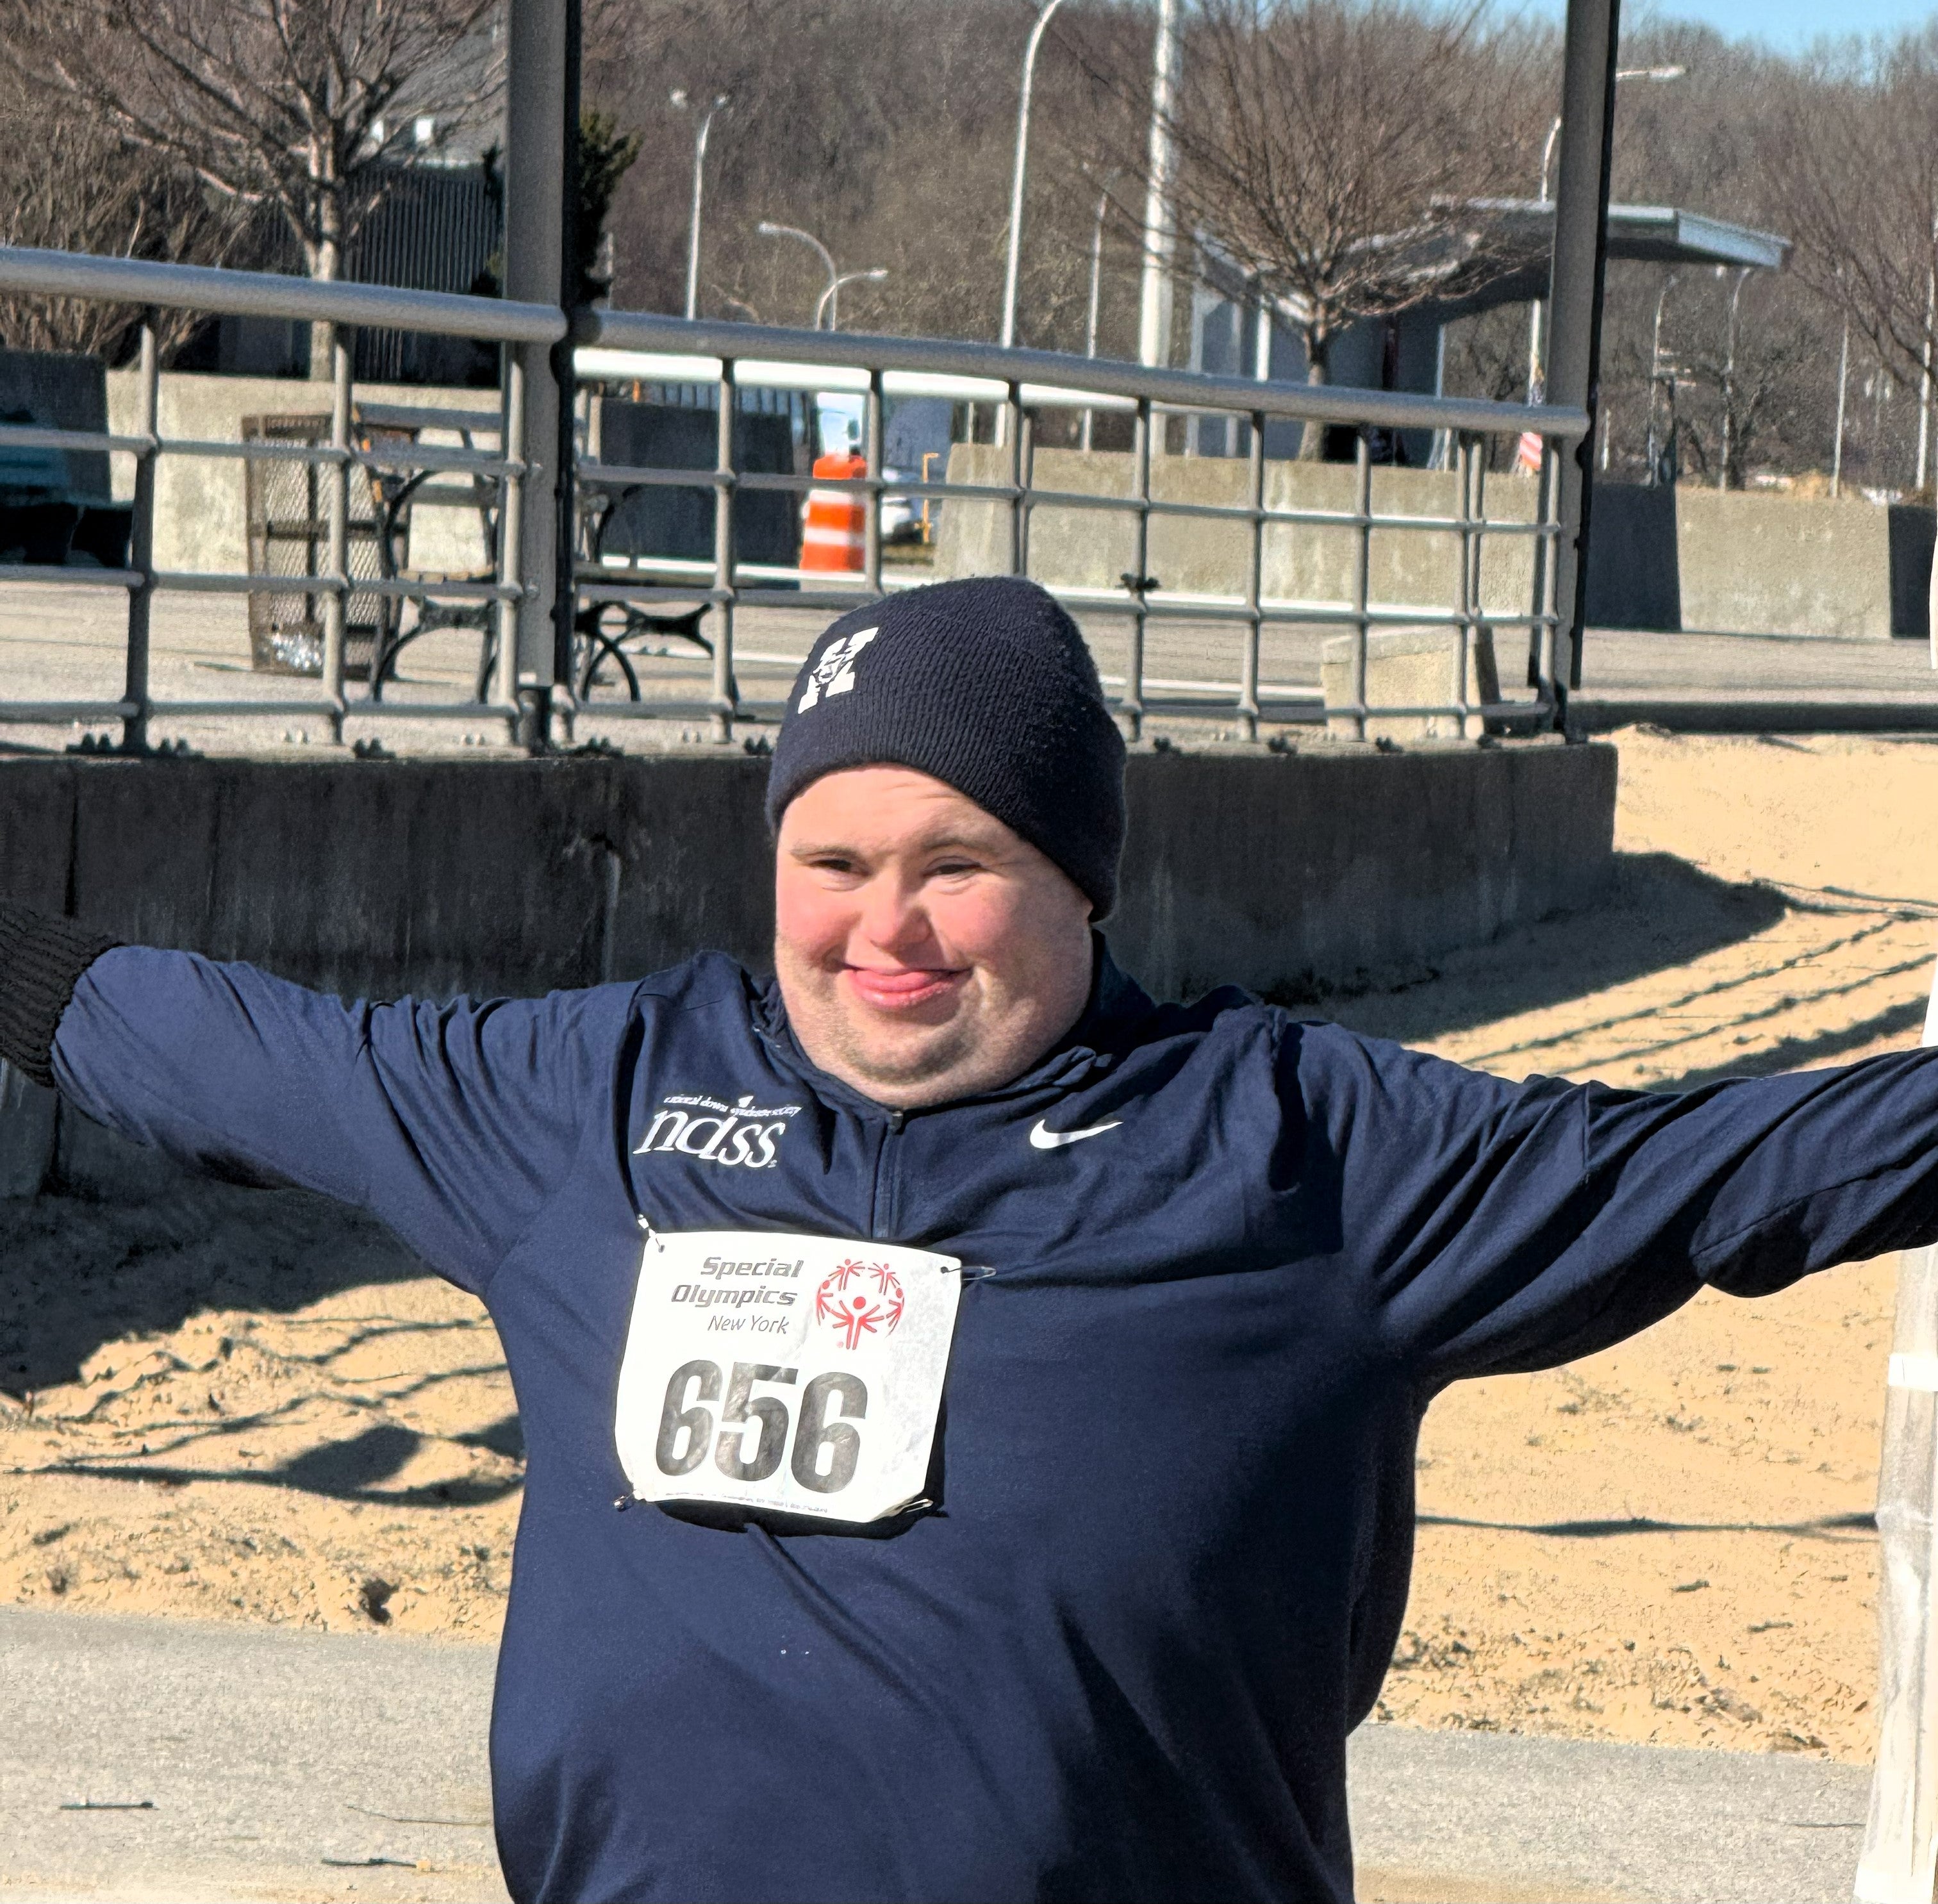 John Competes in the Special Olympics Long Island Snowshoe Meet